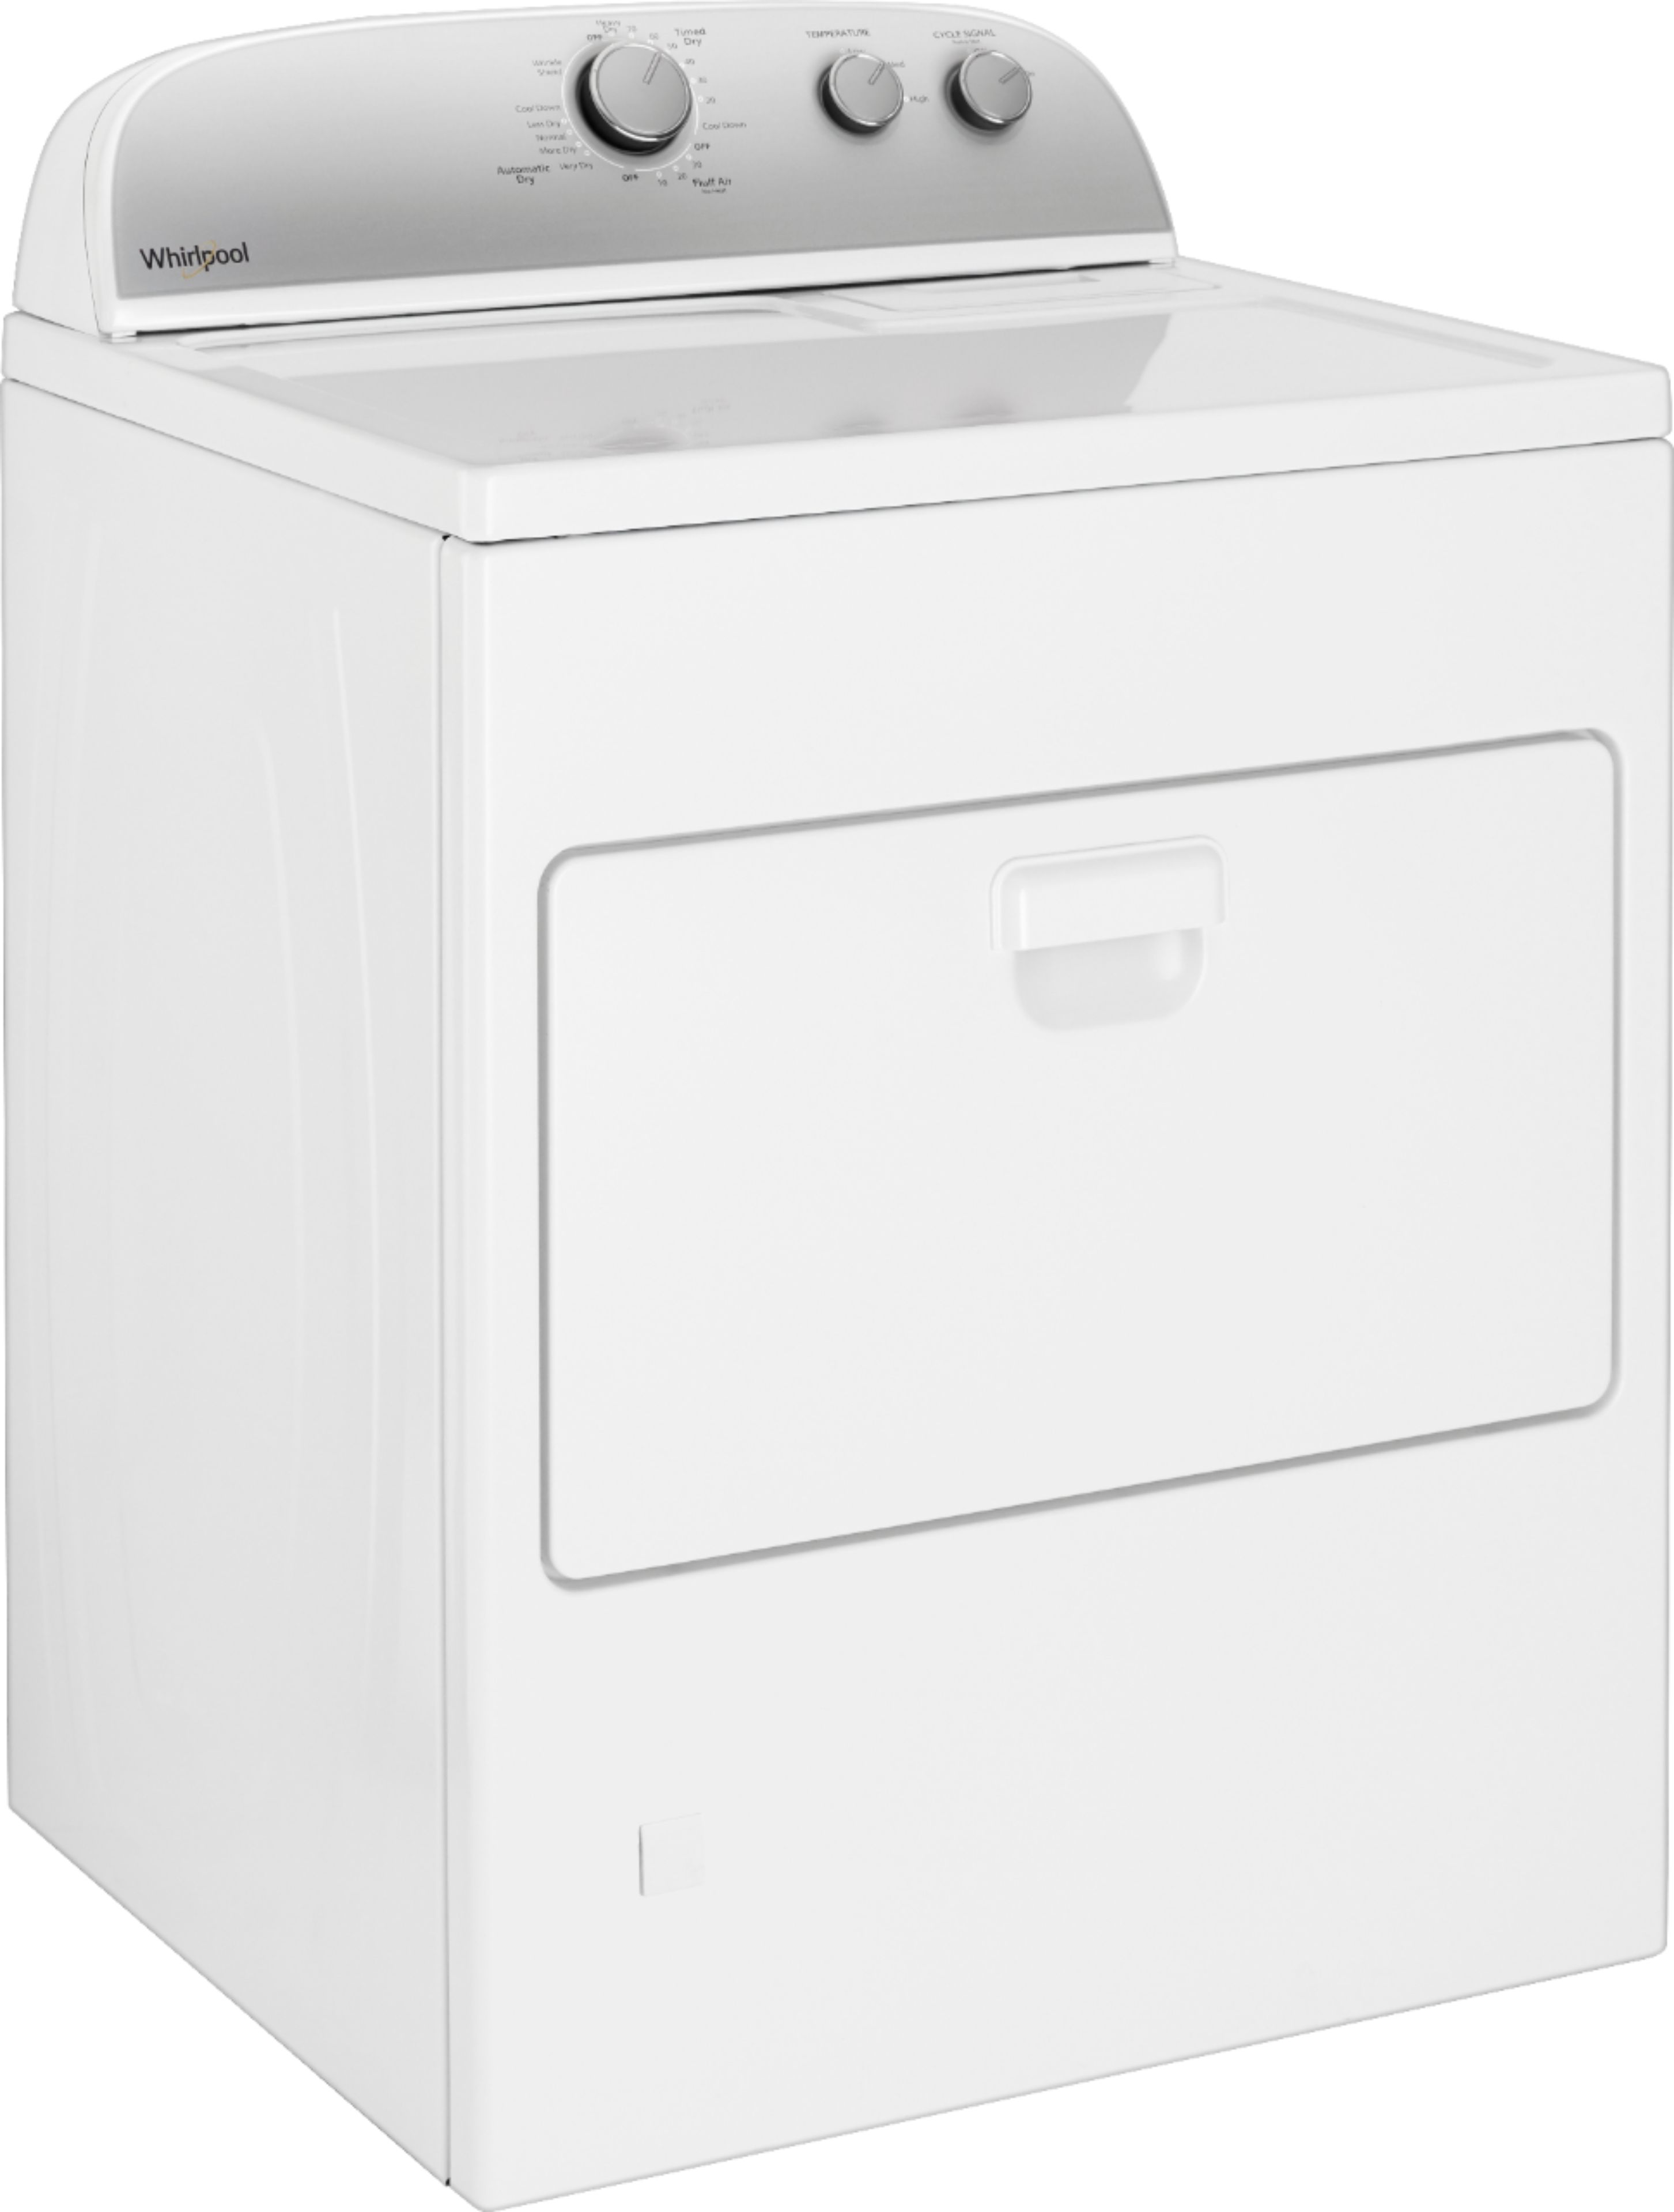 Angle View: Whirlpool - 7.4 Cu. Ft.Gas Dryer with High-Velocity Airflow System - White